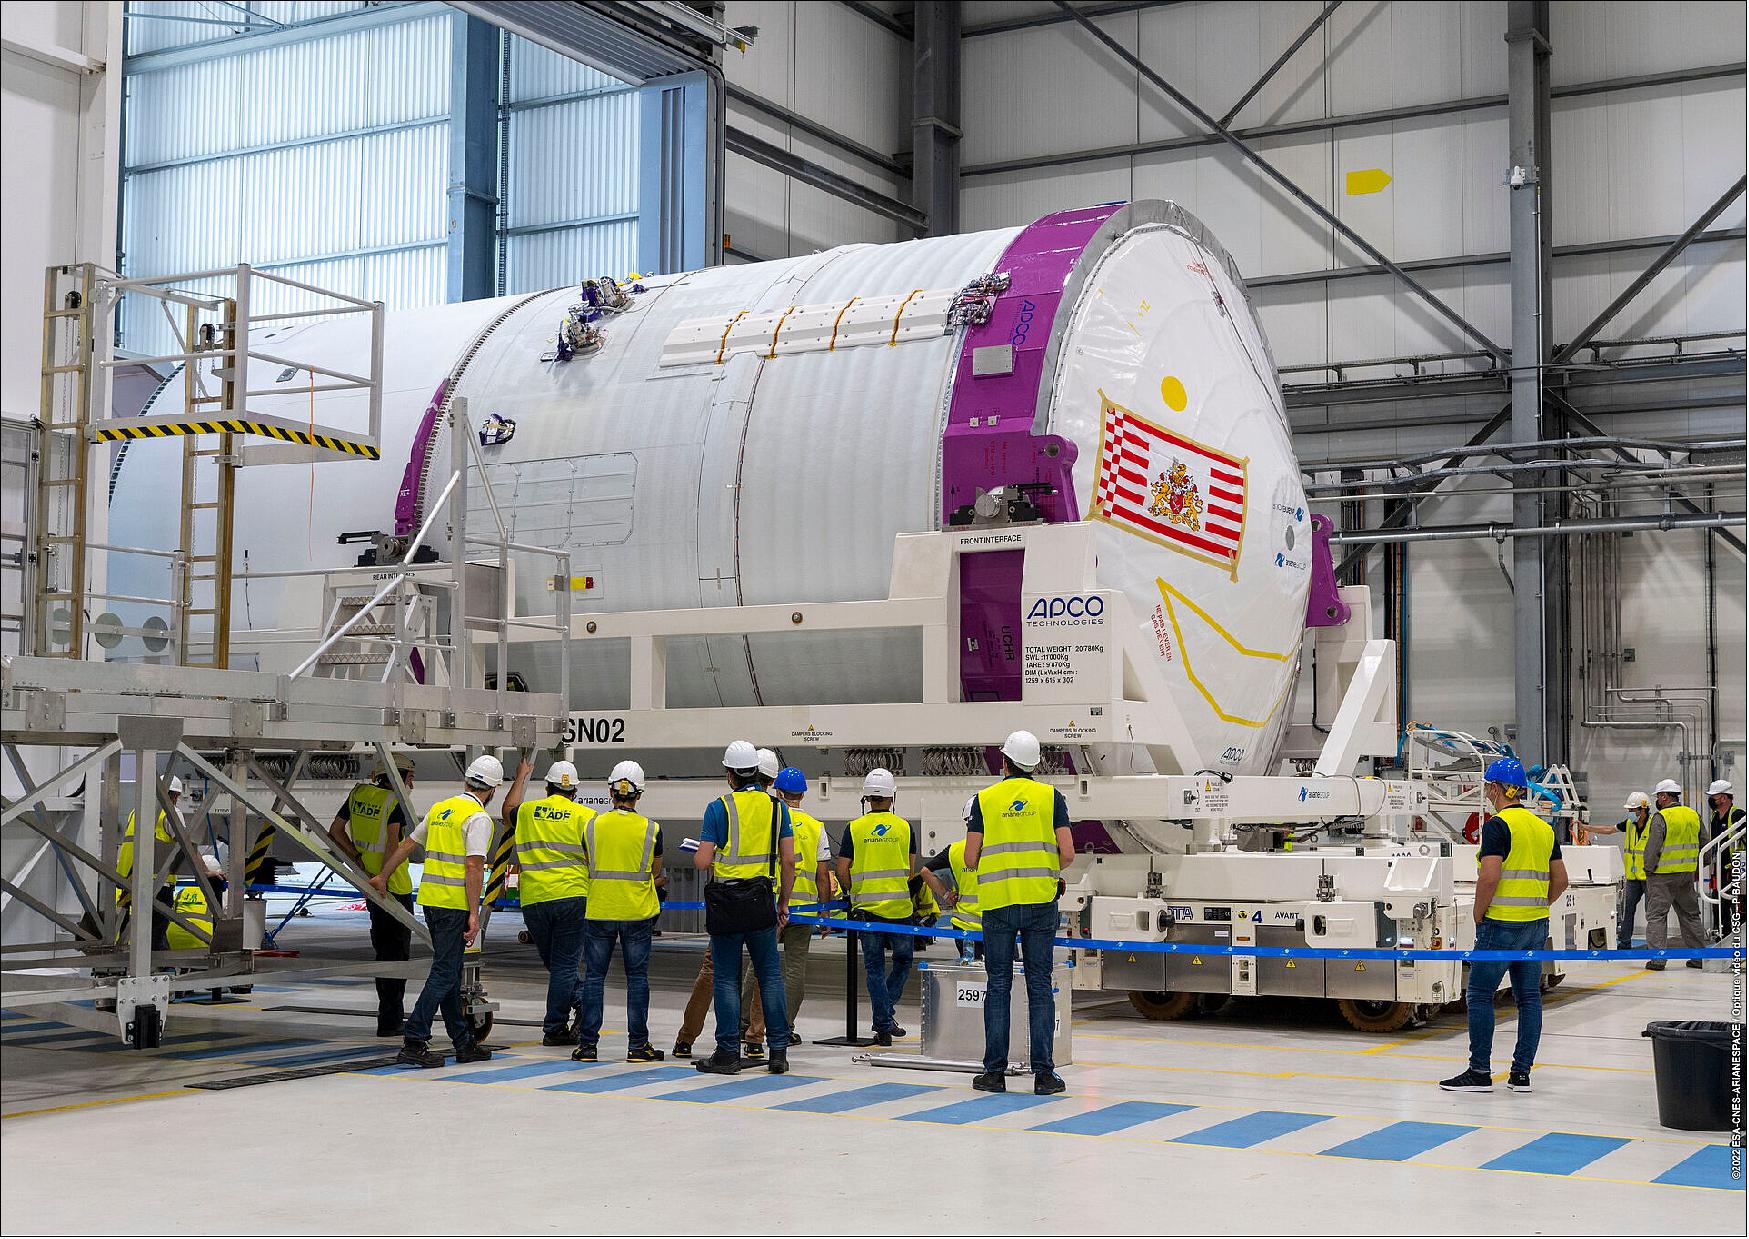 Figure 18: Ariane 6 upper stage inside the assembly building at Europe's Spaceport (image credit: ESA/CNES/Arianespace)